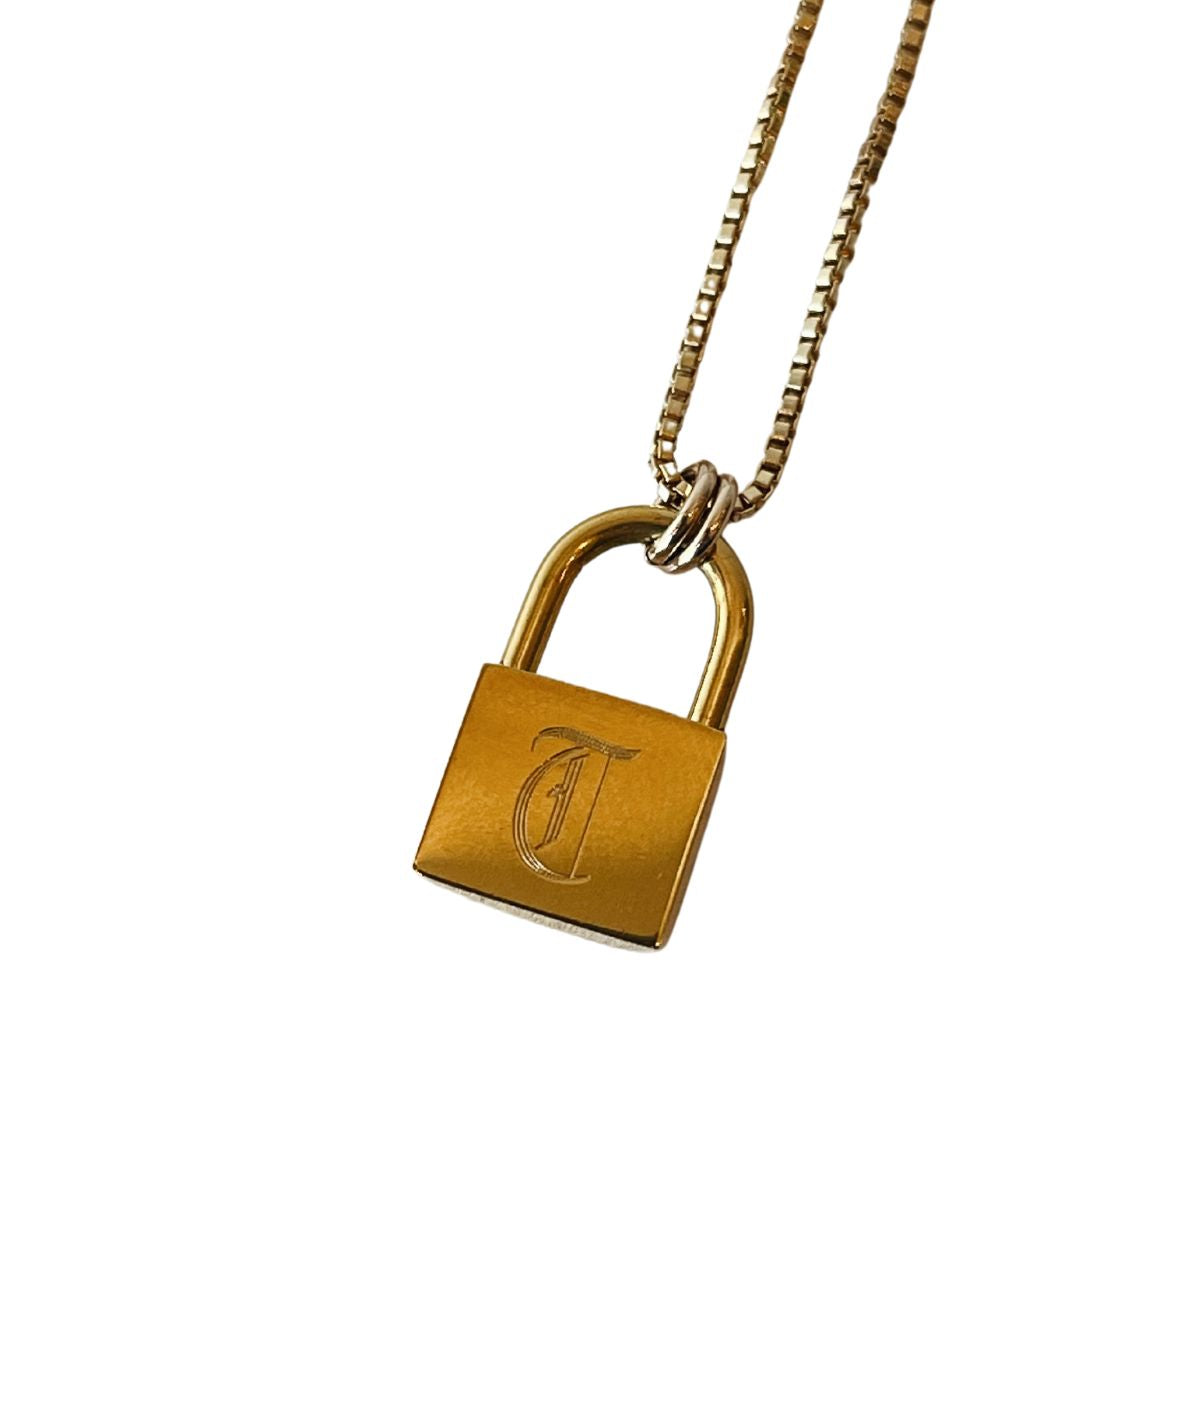 Buy Padlock Necklace, Initial Pendant Necklace, Initial Padlock, Initial  Necklace, Personalized Jewelry, Silver Padlock Necklace Online in India -  Etsy